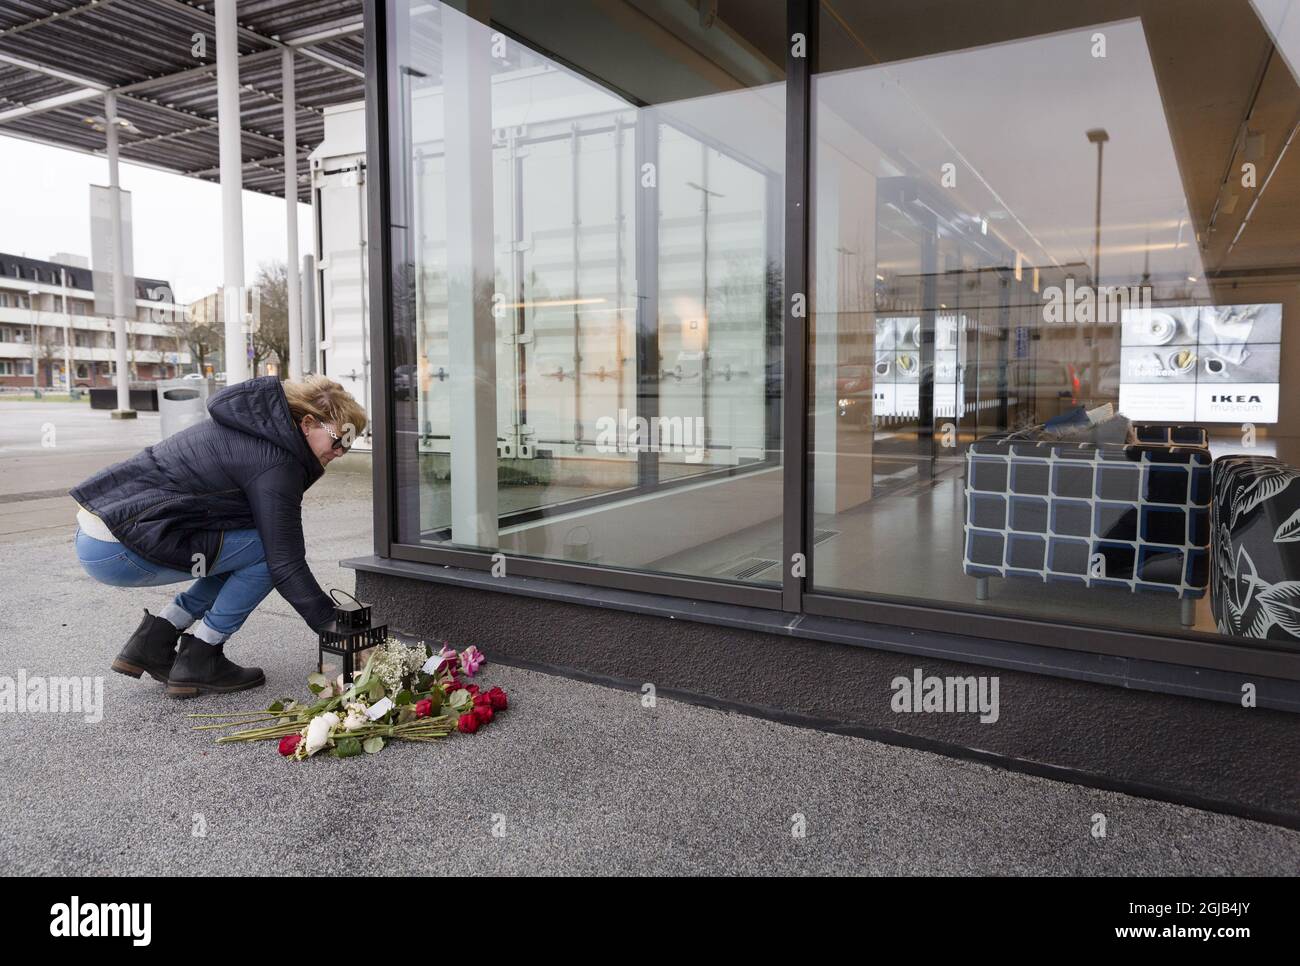 ALMHULT 20180128 A woman puts flowers on the ground outside the IKEA store in Almhult, Sweden, on Jan. 28, 2018. Ingvar Kamprad, founder of Swedish multinational furniture retailer IKEA has died at an age of 91. Photo: Ola Torkelsson / TT / kod 75777  Stock Photo